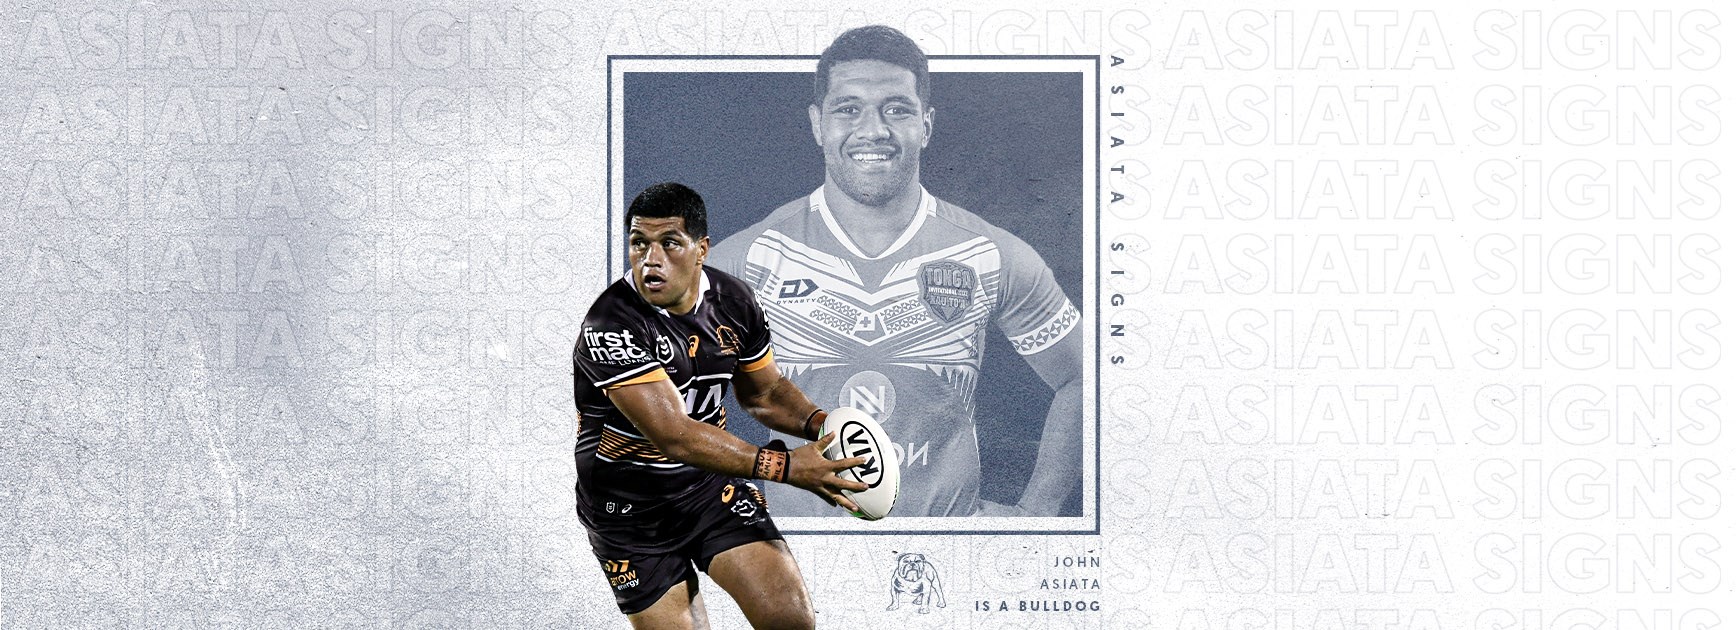 Bulldogs sign John Asiata on a one year deal